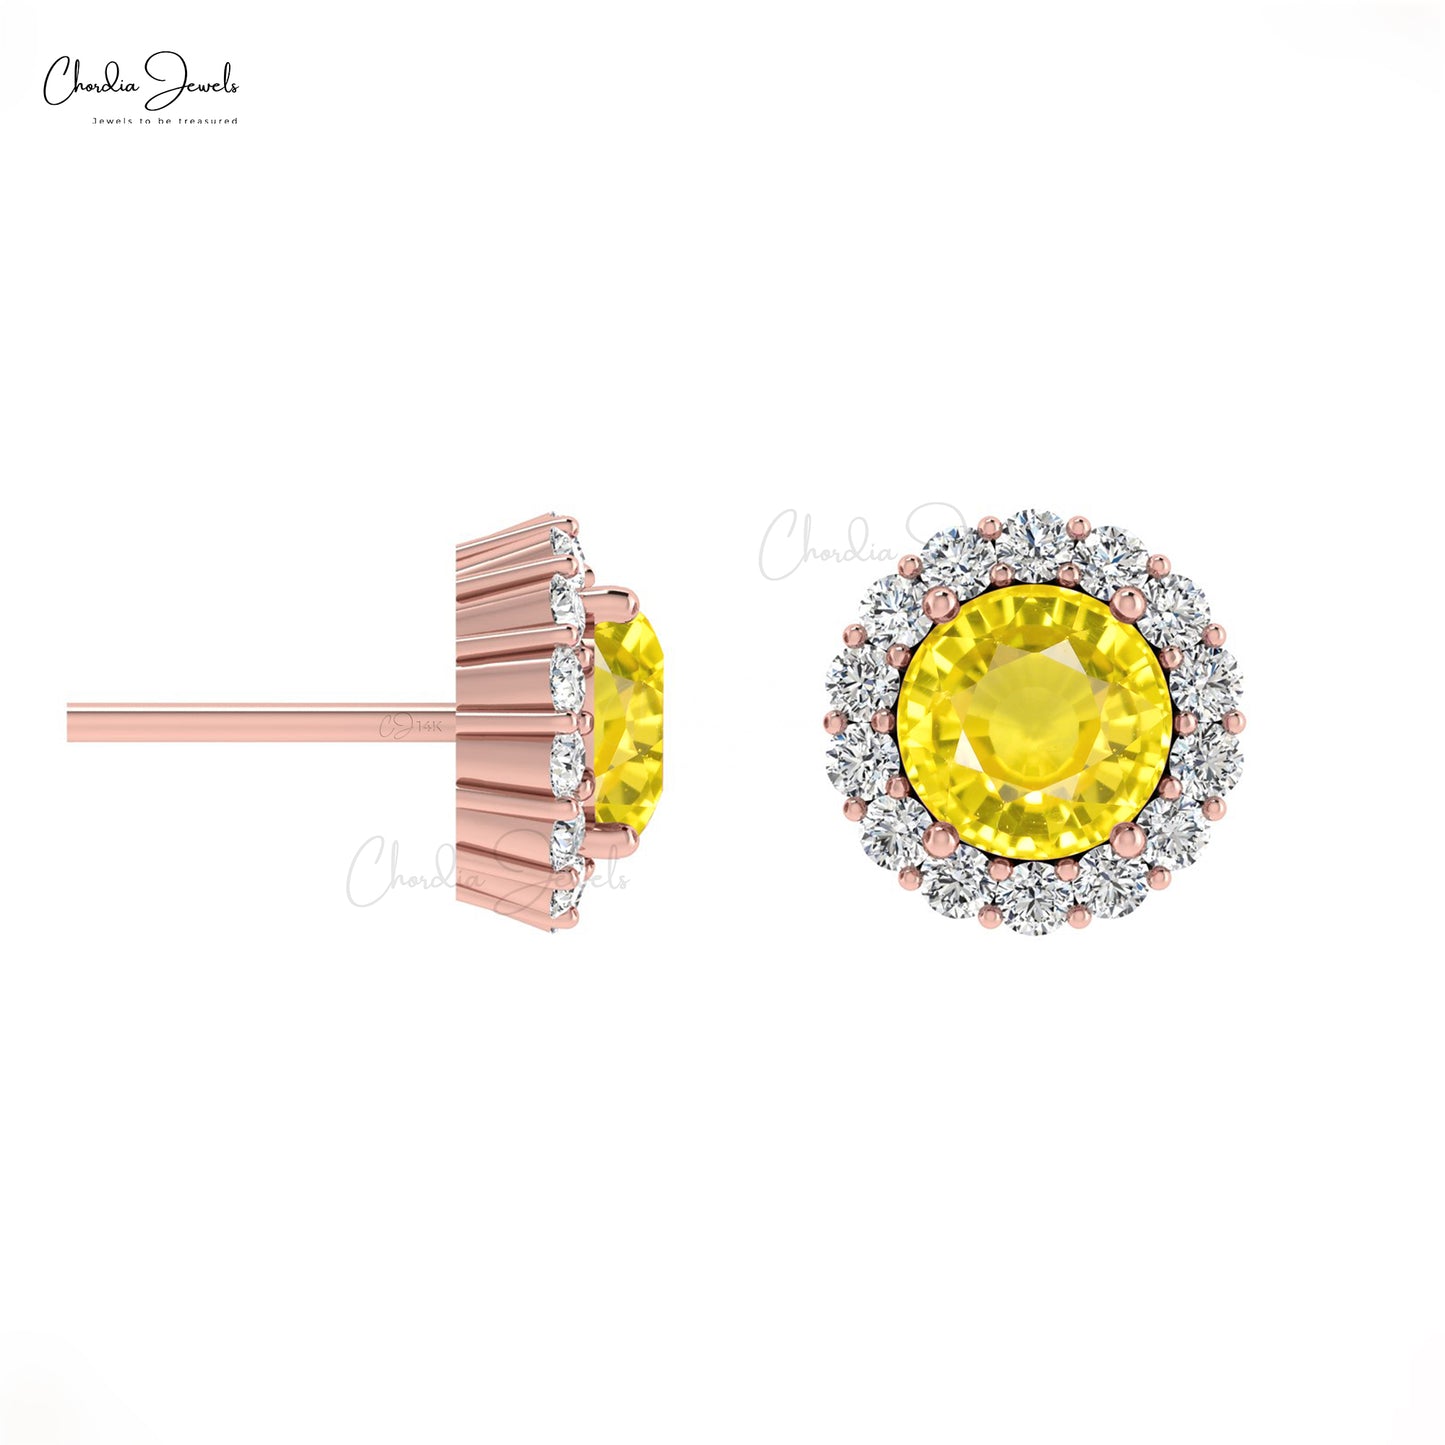 Genuine Yellow Sapphire 4mm Brilliant Round Cut Dainty Studs 14k Solid Gold White Diamond Halo Earrings  For Wedding Gift